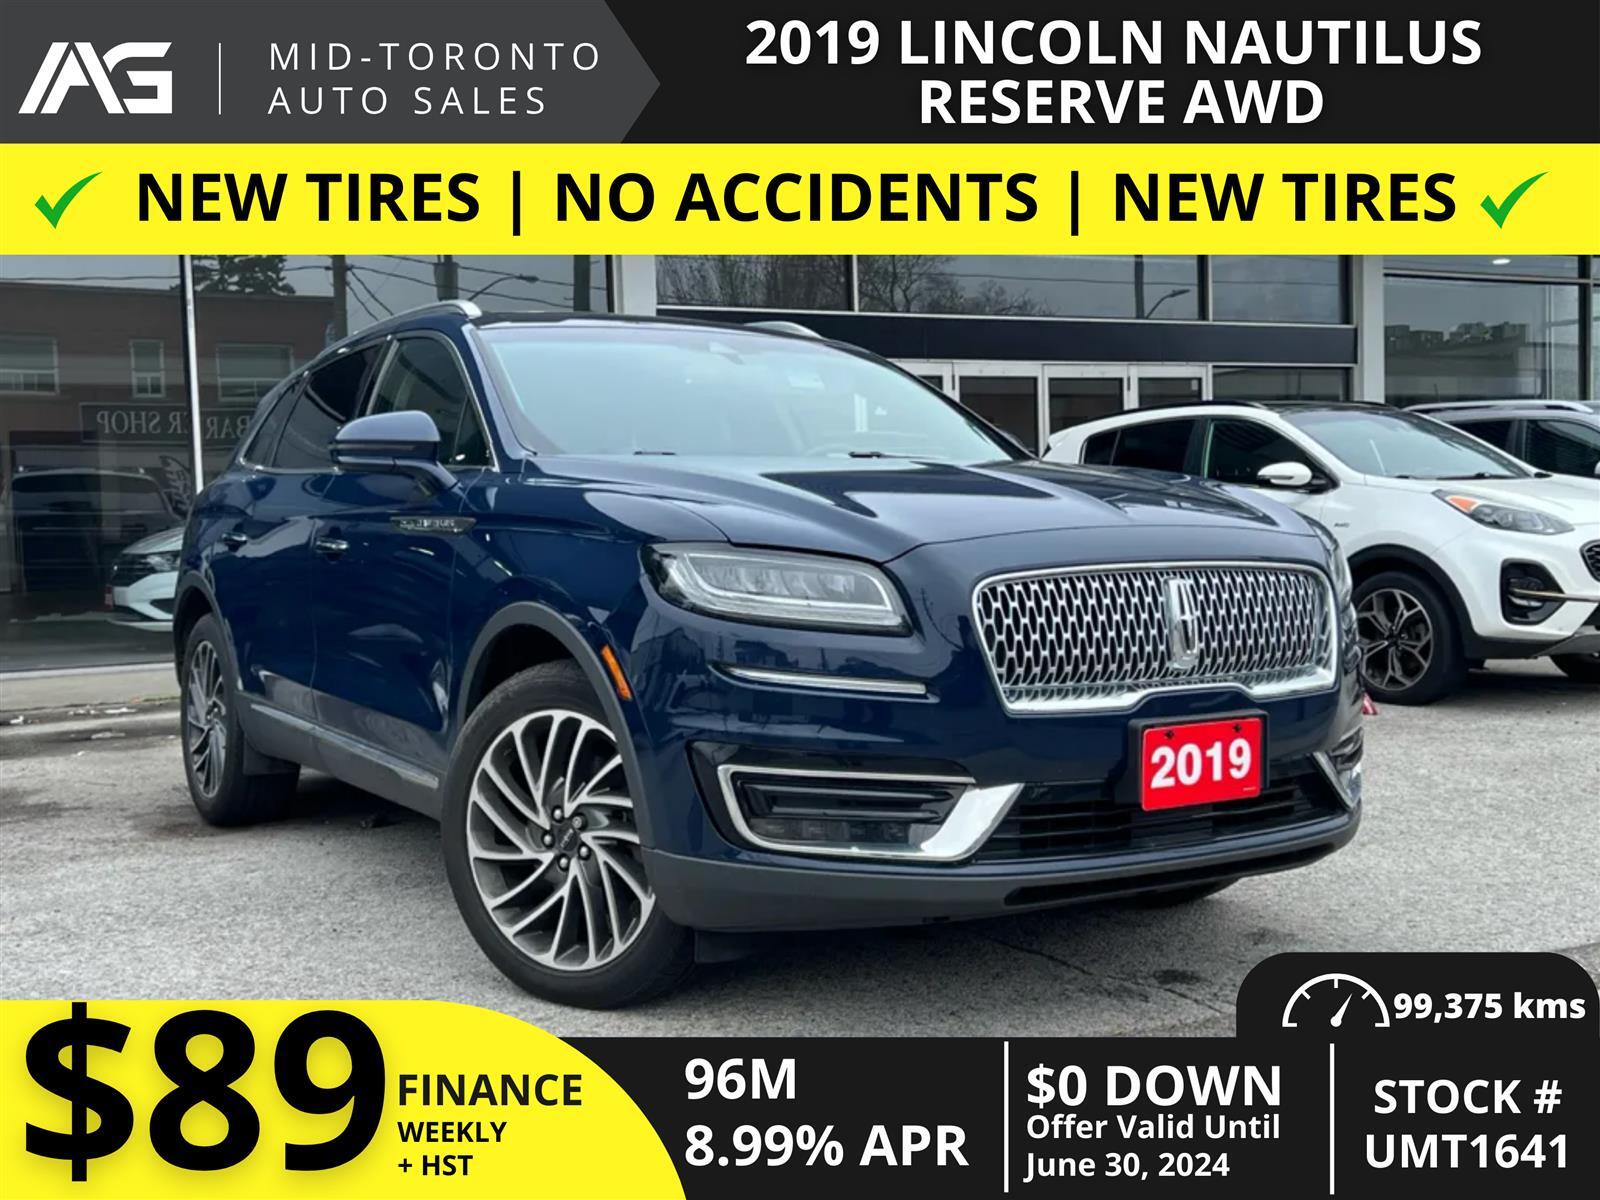 2019 Lincoln Nautilus Reserve - Excellent Condition - No Accidents - One